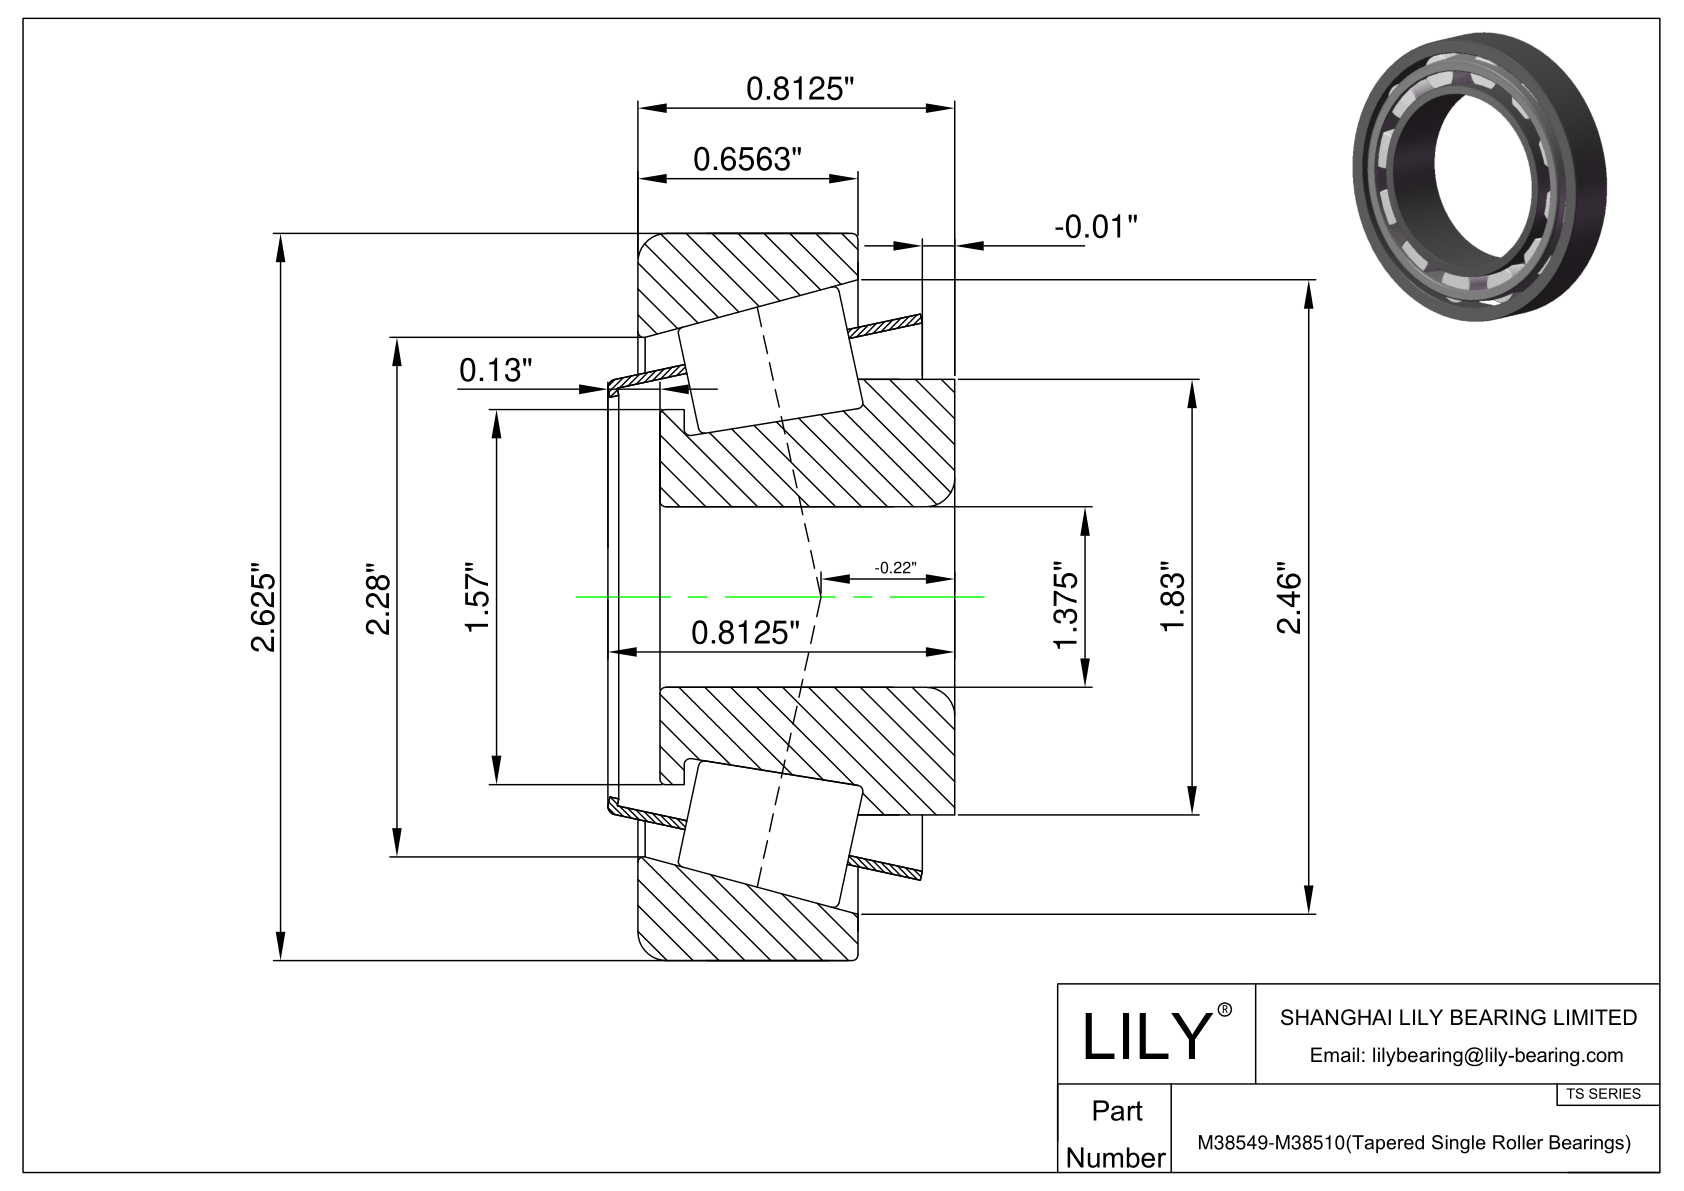 M38549-M38510 TS (Tapered Single Roller Bearings) (Imperial) cad drawing